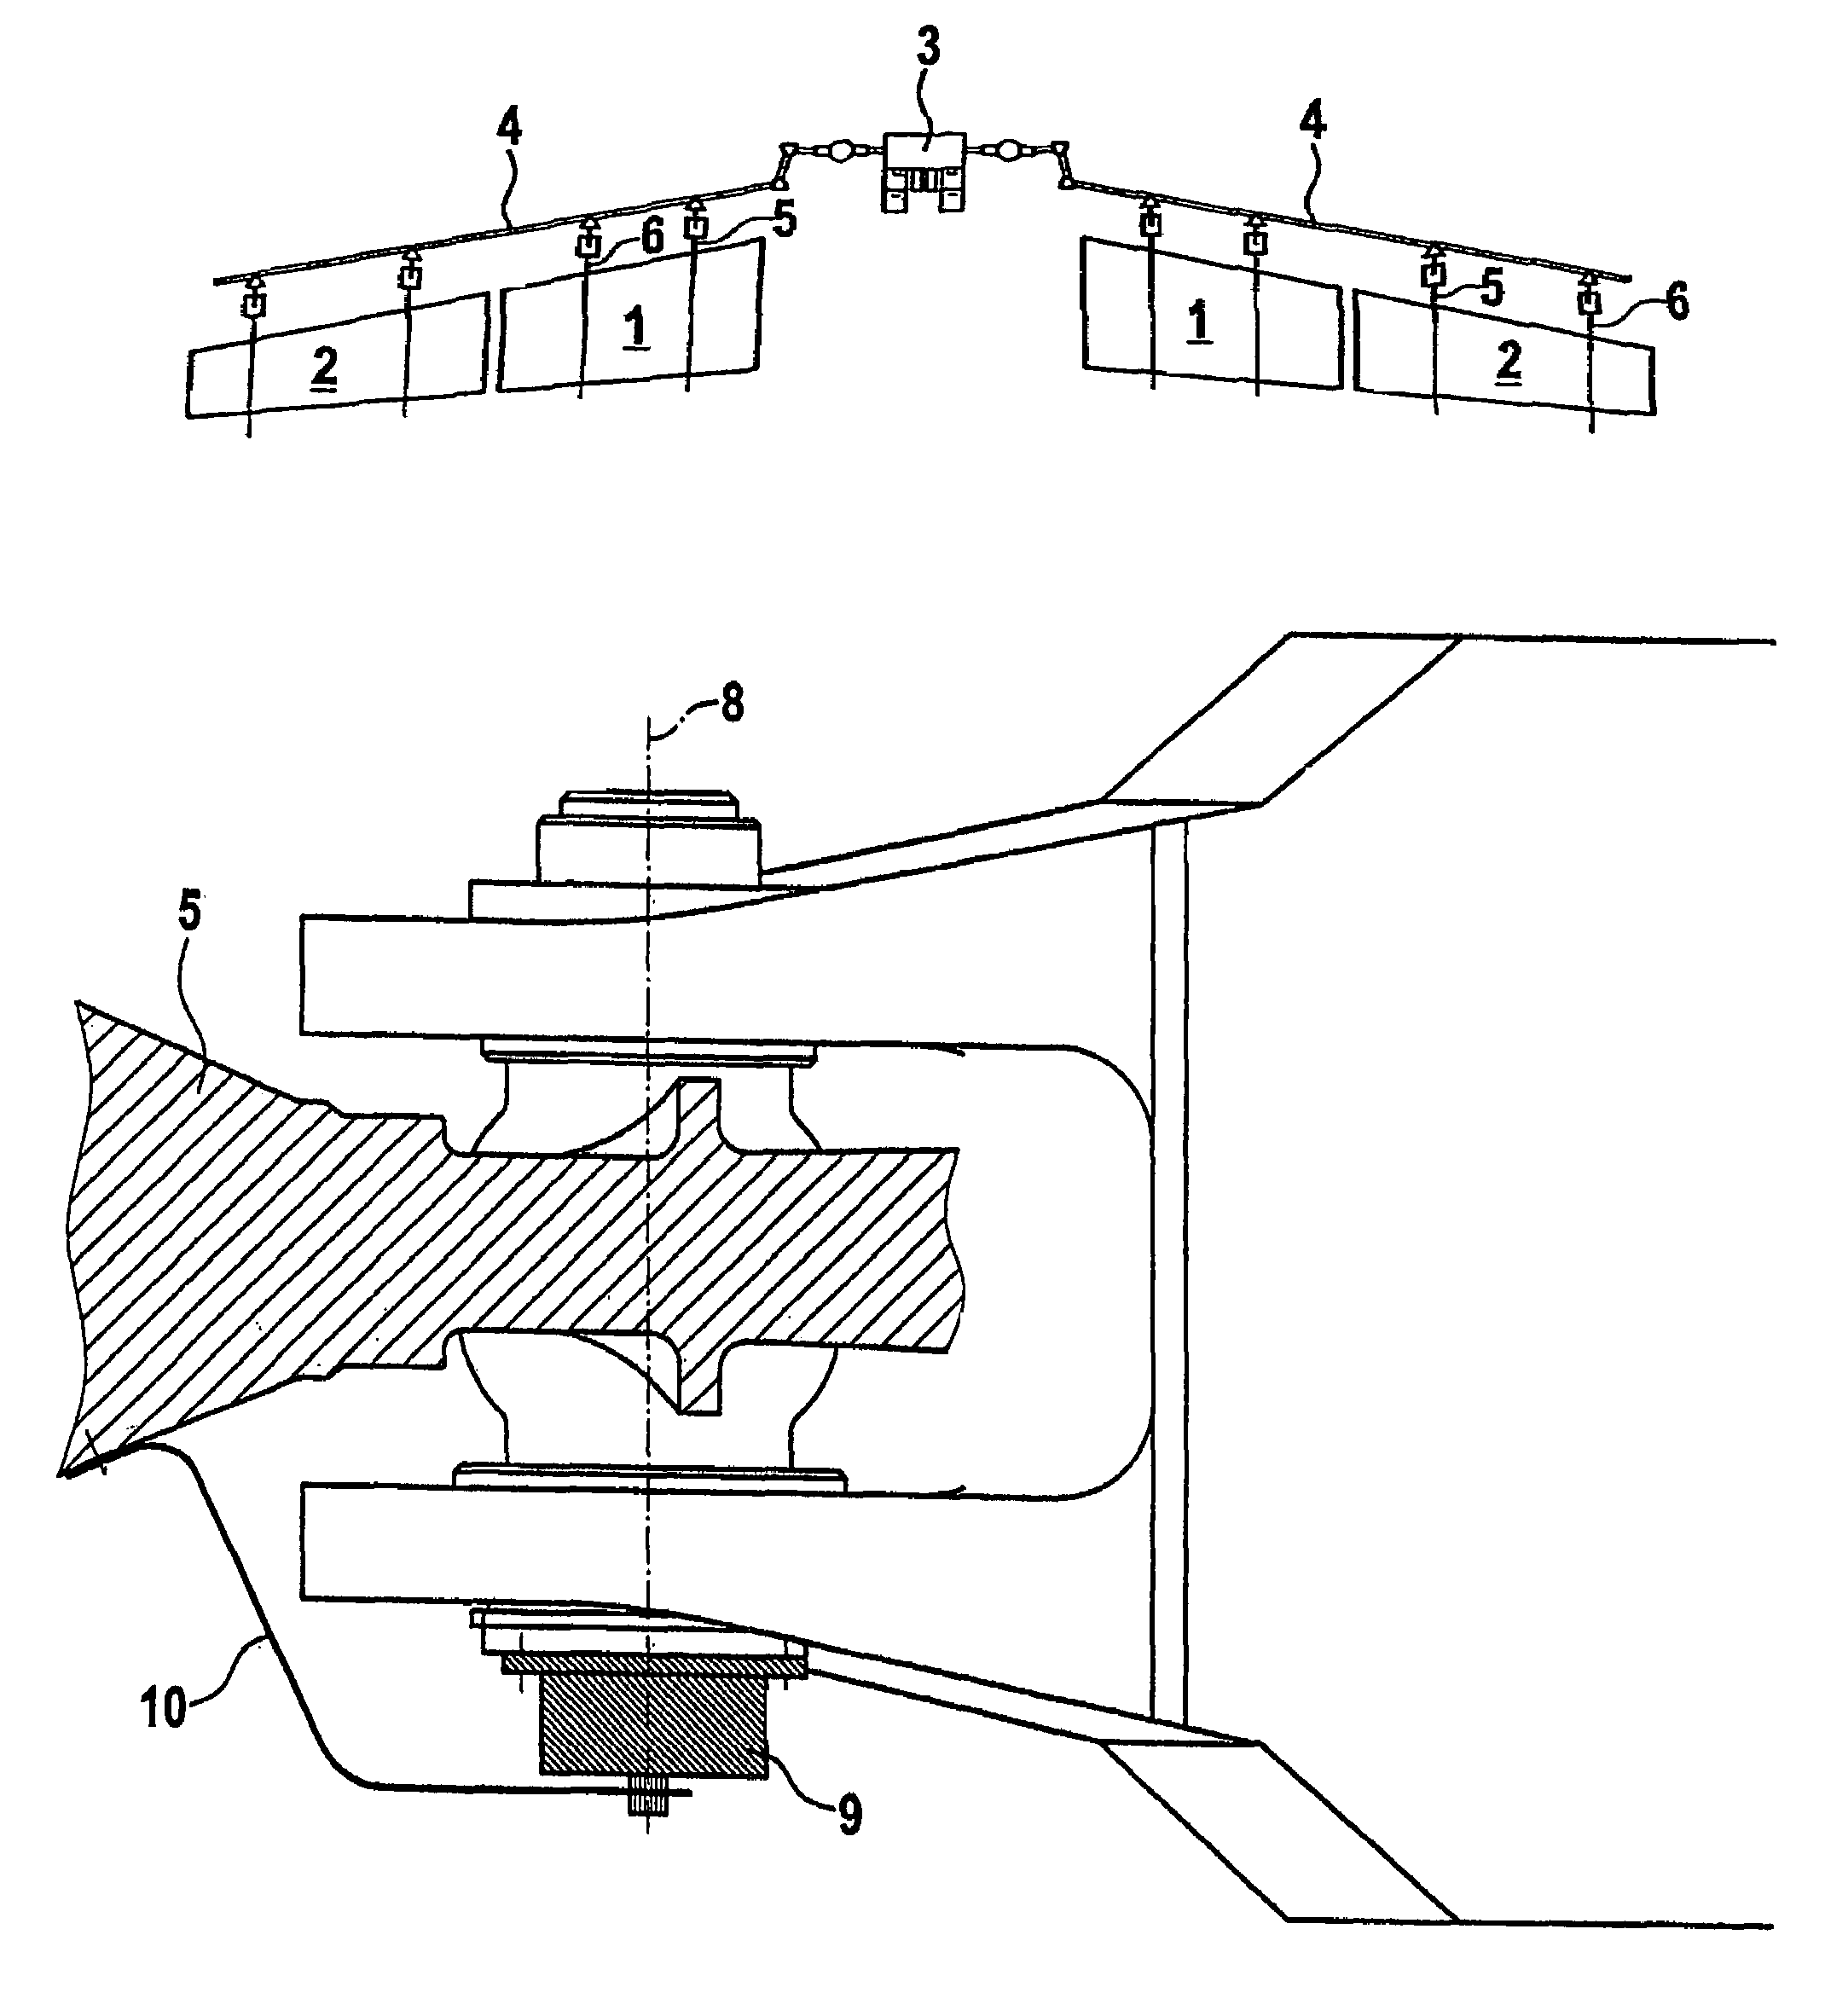 Device for monitoring tiltable flaps on aircraft wings